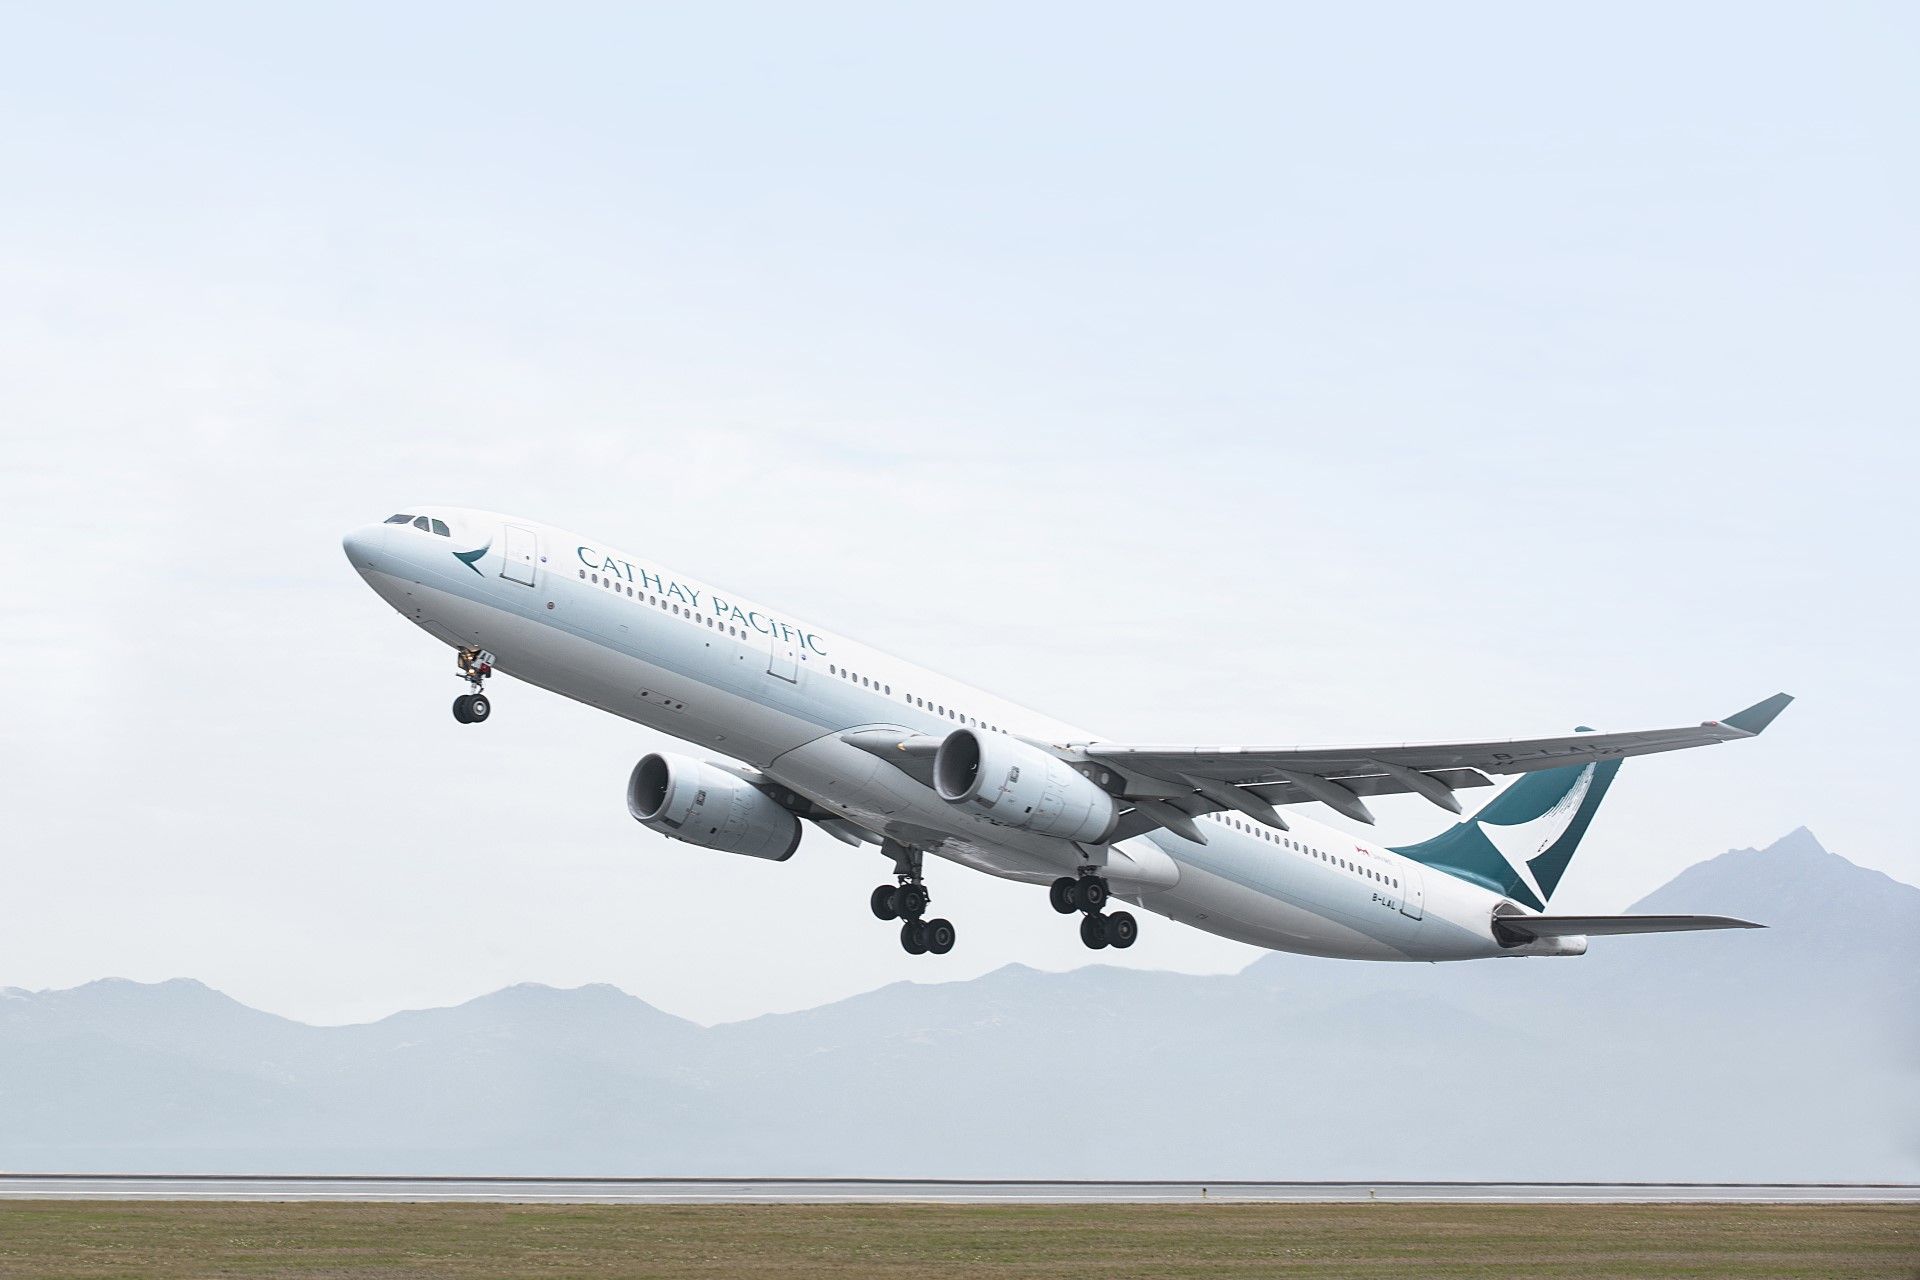 Cathay Pacific Airbus A330-300 taking off. 